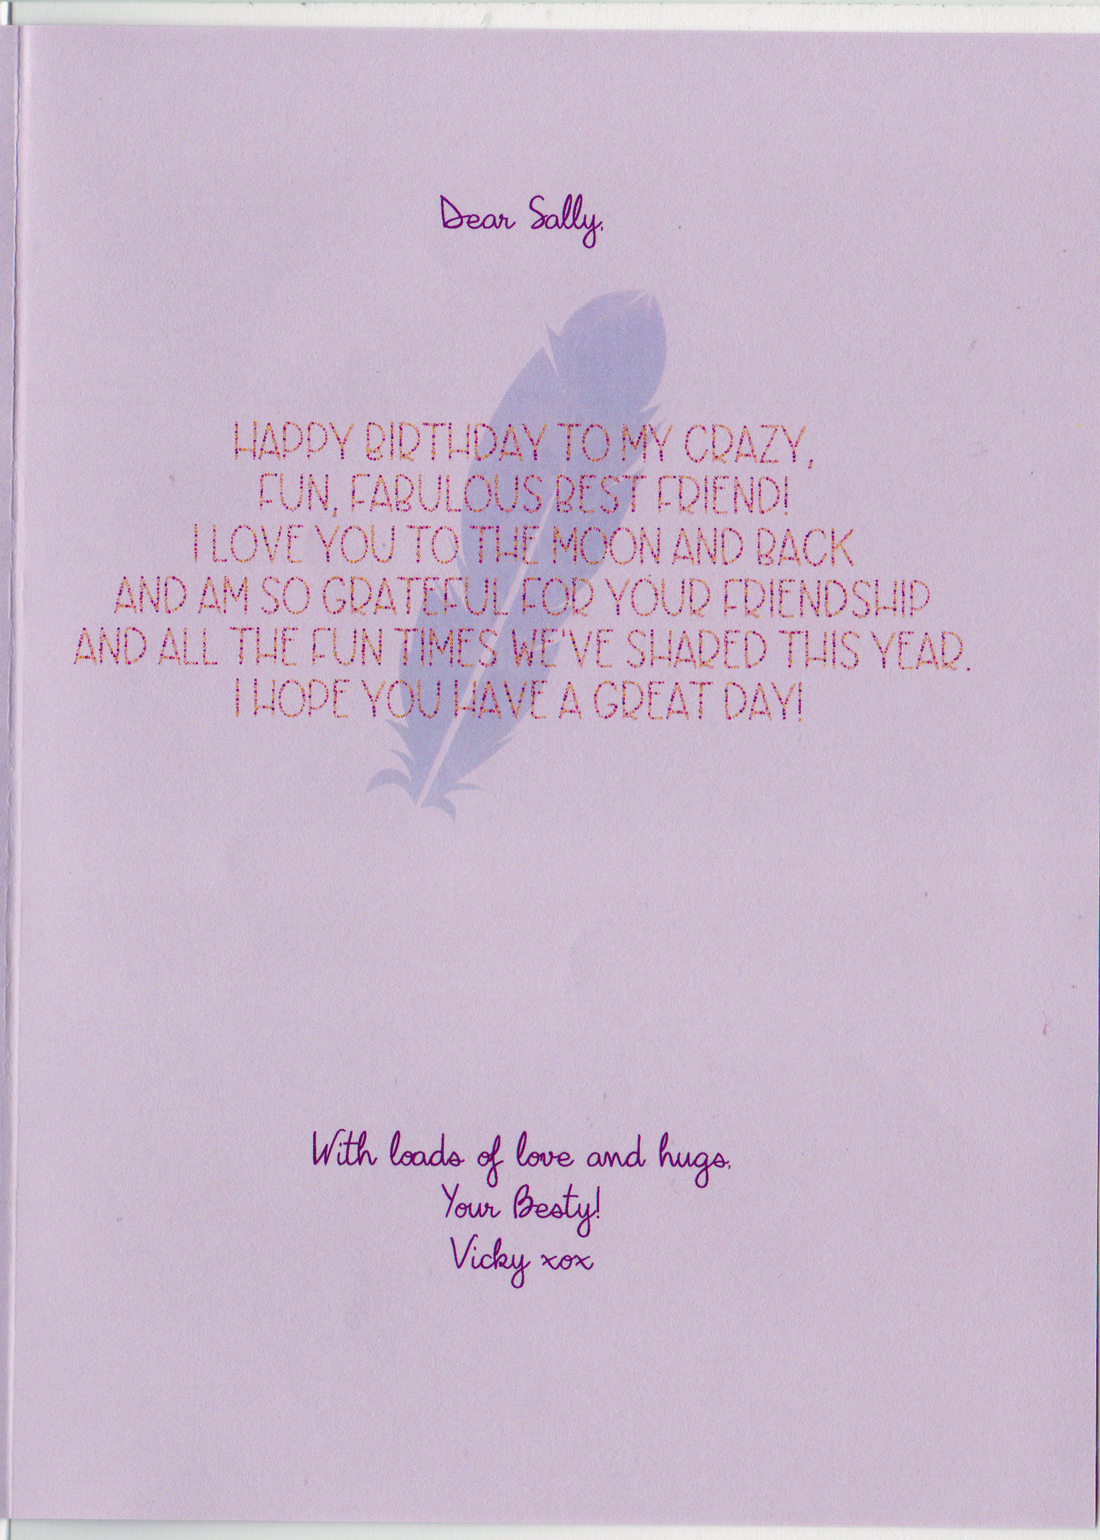 A ghosted plum feather sits on lilac paper. The text example as follows: &quot;Dear, Sally, Happy Birthday to my crazy,  fun, fabulous best friend! I love you to the moon and back and am so grateful for your friendship and all the fun times we&